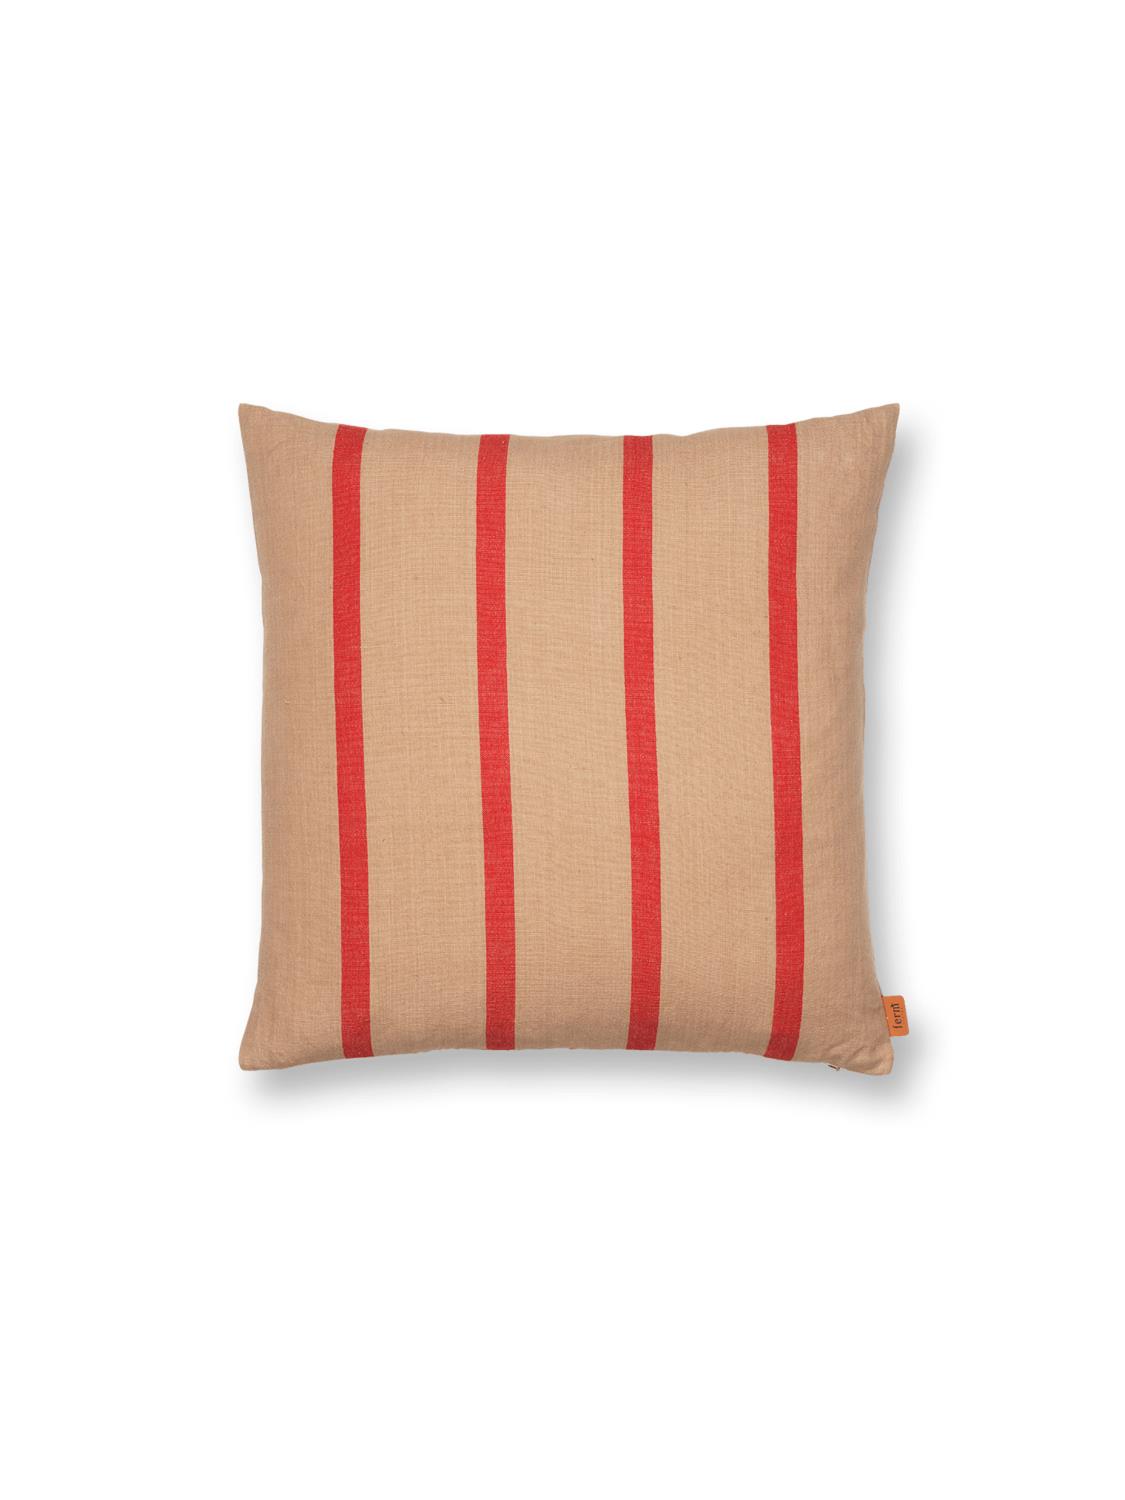 Ferm Living - Grand Cushion - Camel and Red